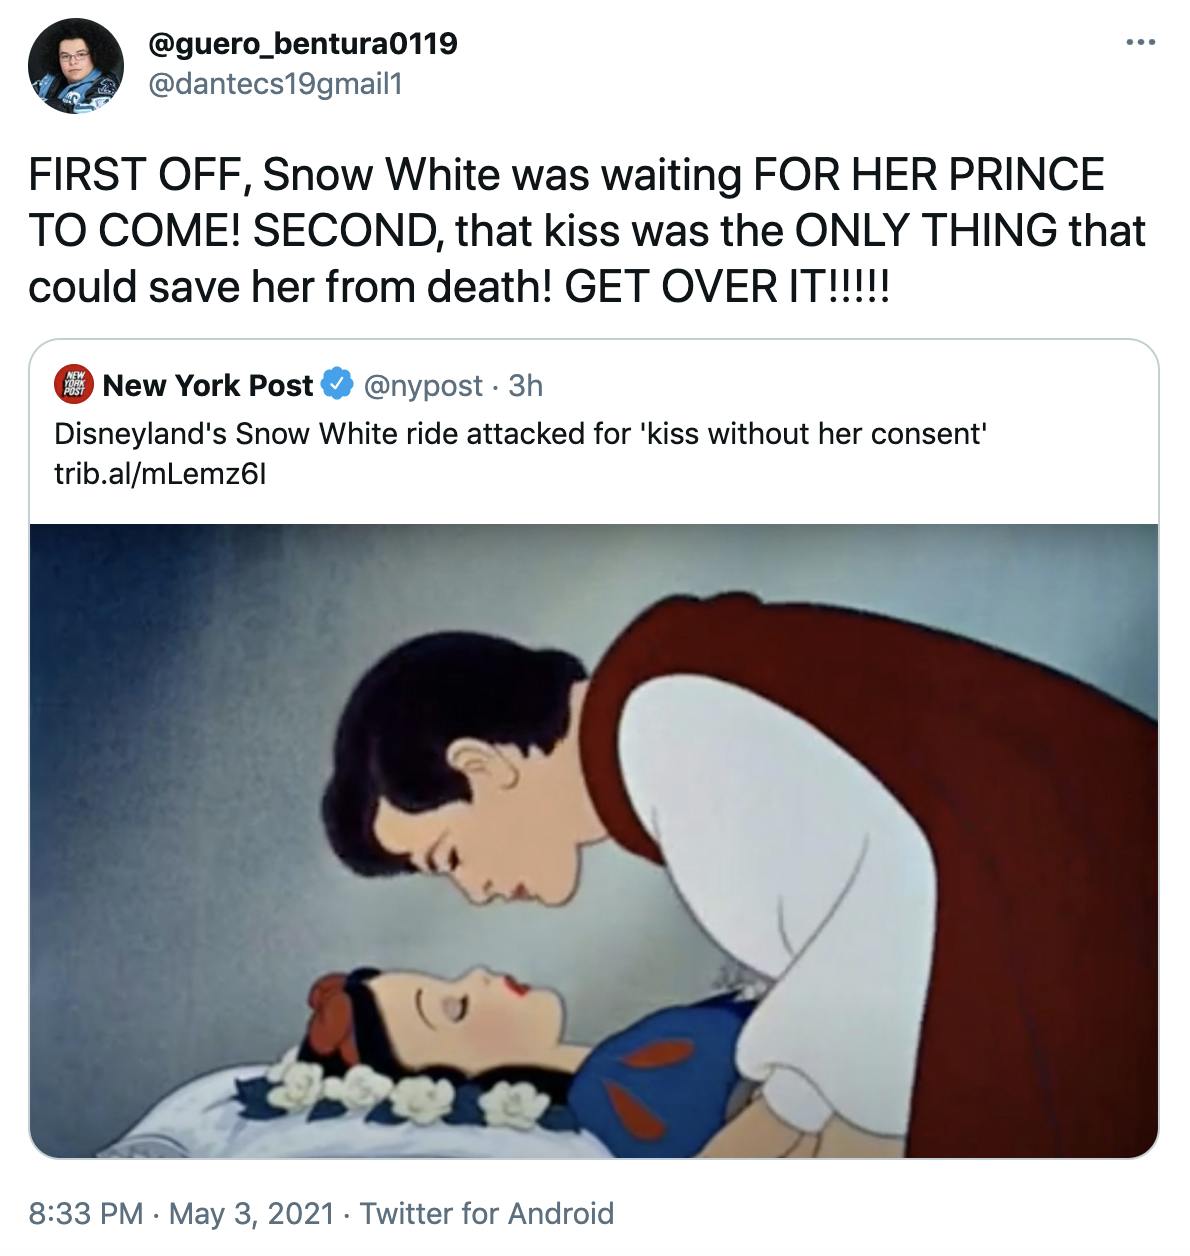 'FIRST OFF, Snow White was waiting FOR HER PRINCE TO COME! SECOND, that kiss was the ONLY THING that could save her from death! GET OVER IT!!!!!' link to New York Post article with the kiss scene from the film as the header image